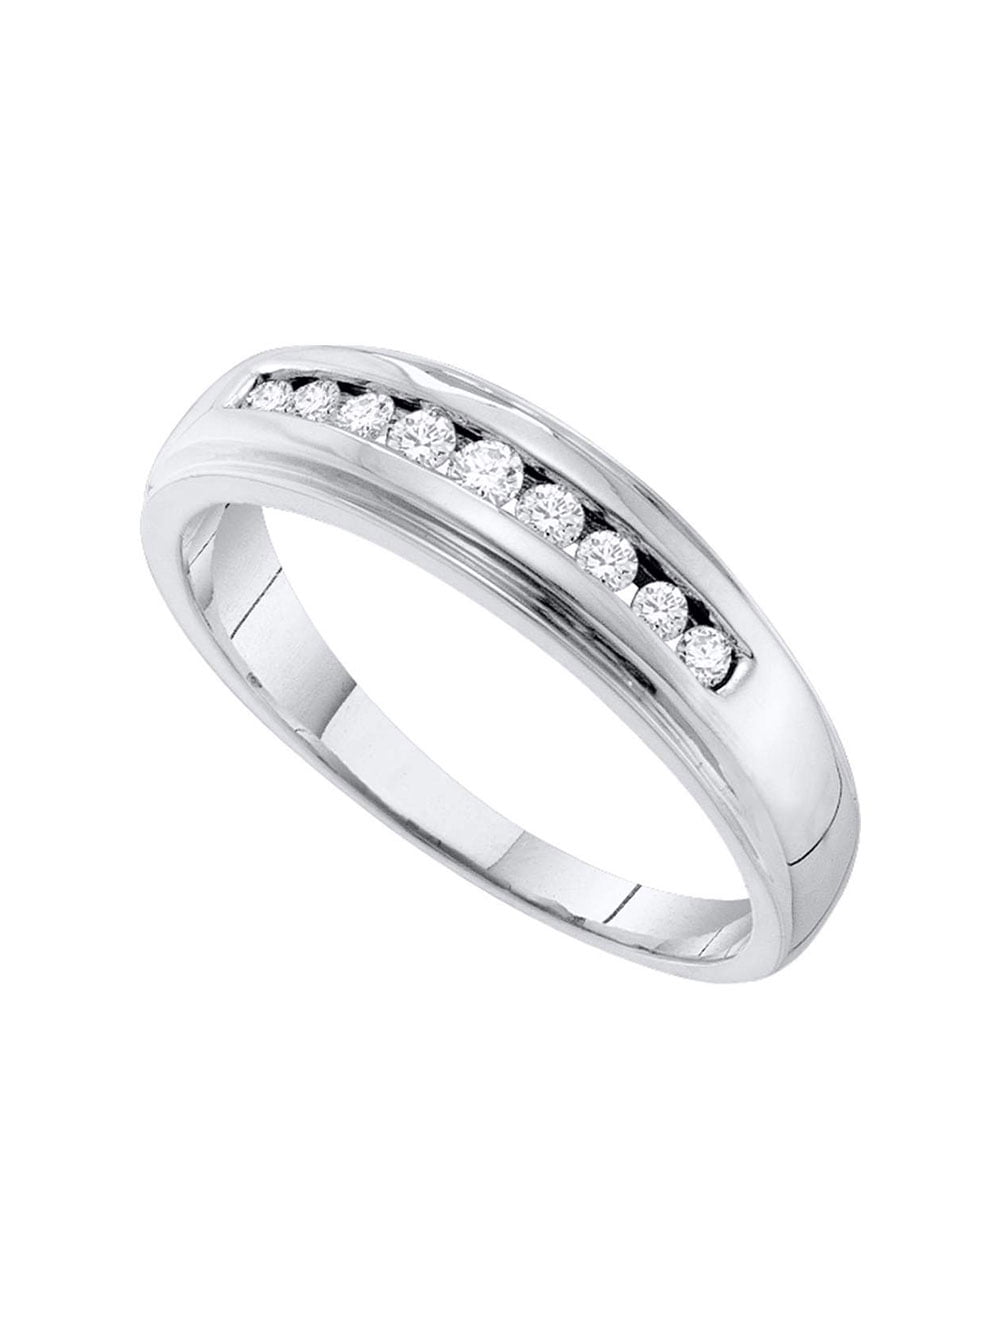 Details about   14K Yellow/White Gold 6mm Design Wedding Band 